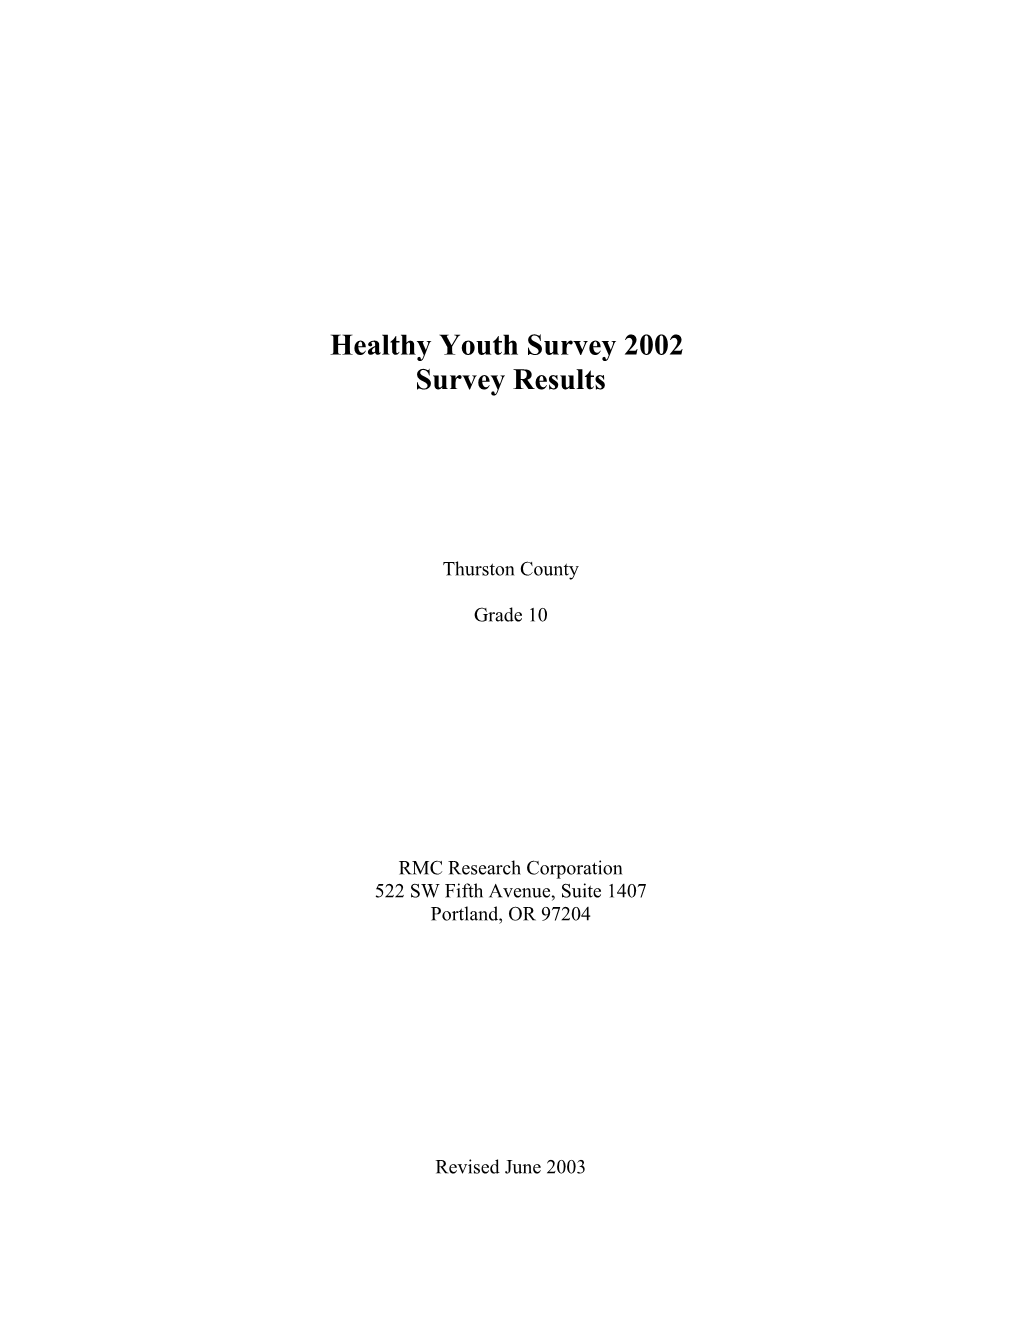 Healthy Youth Survey 2002 Survey Results